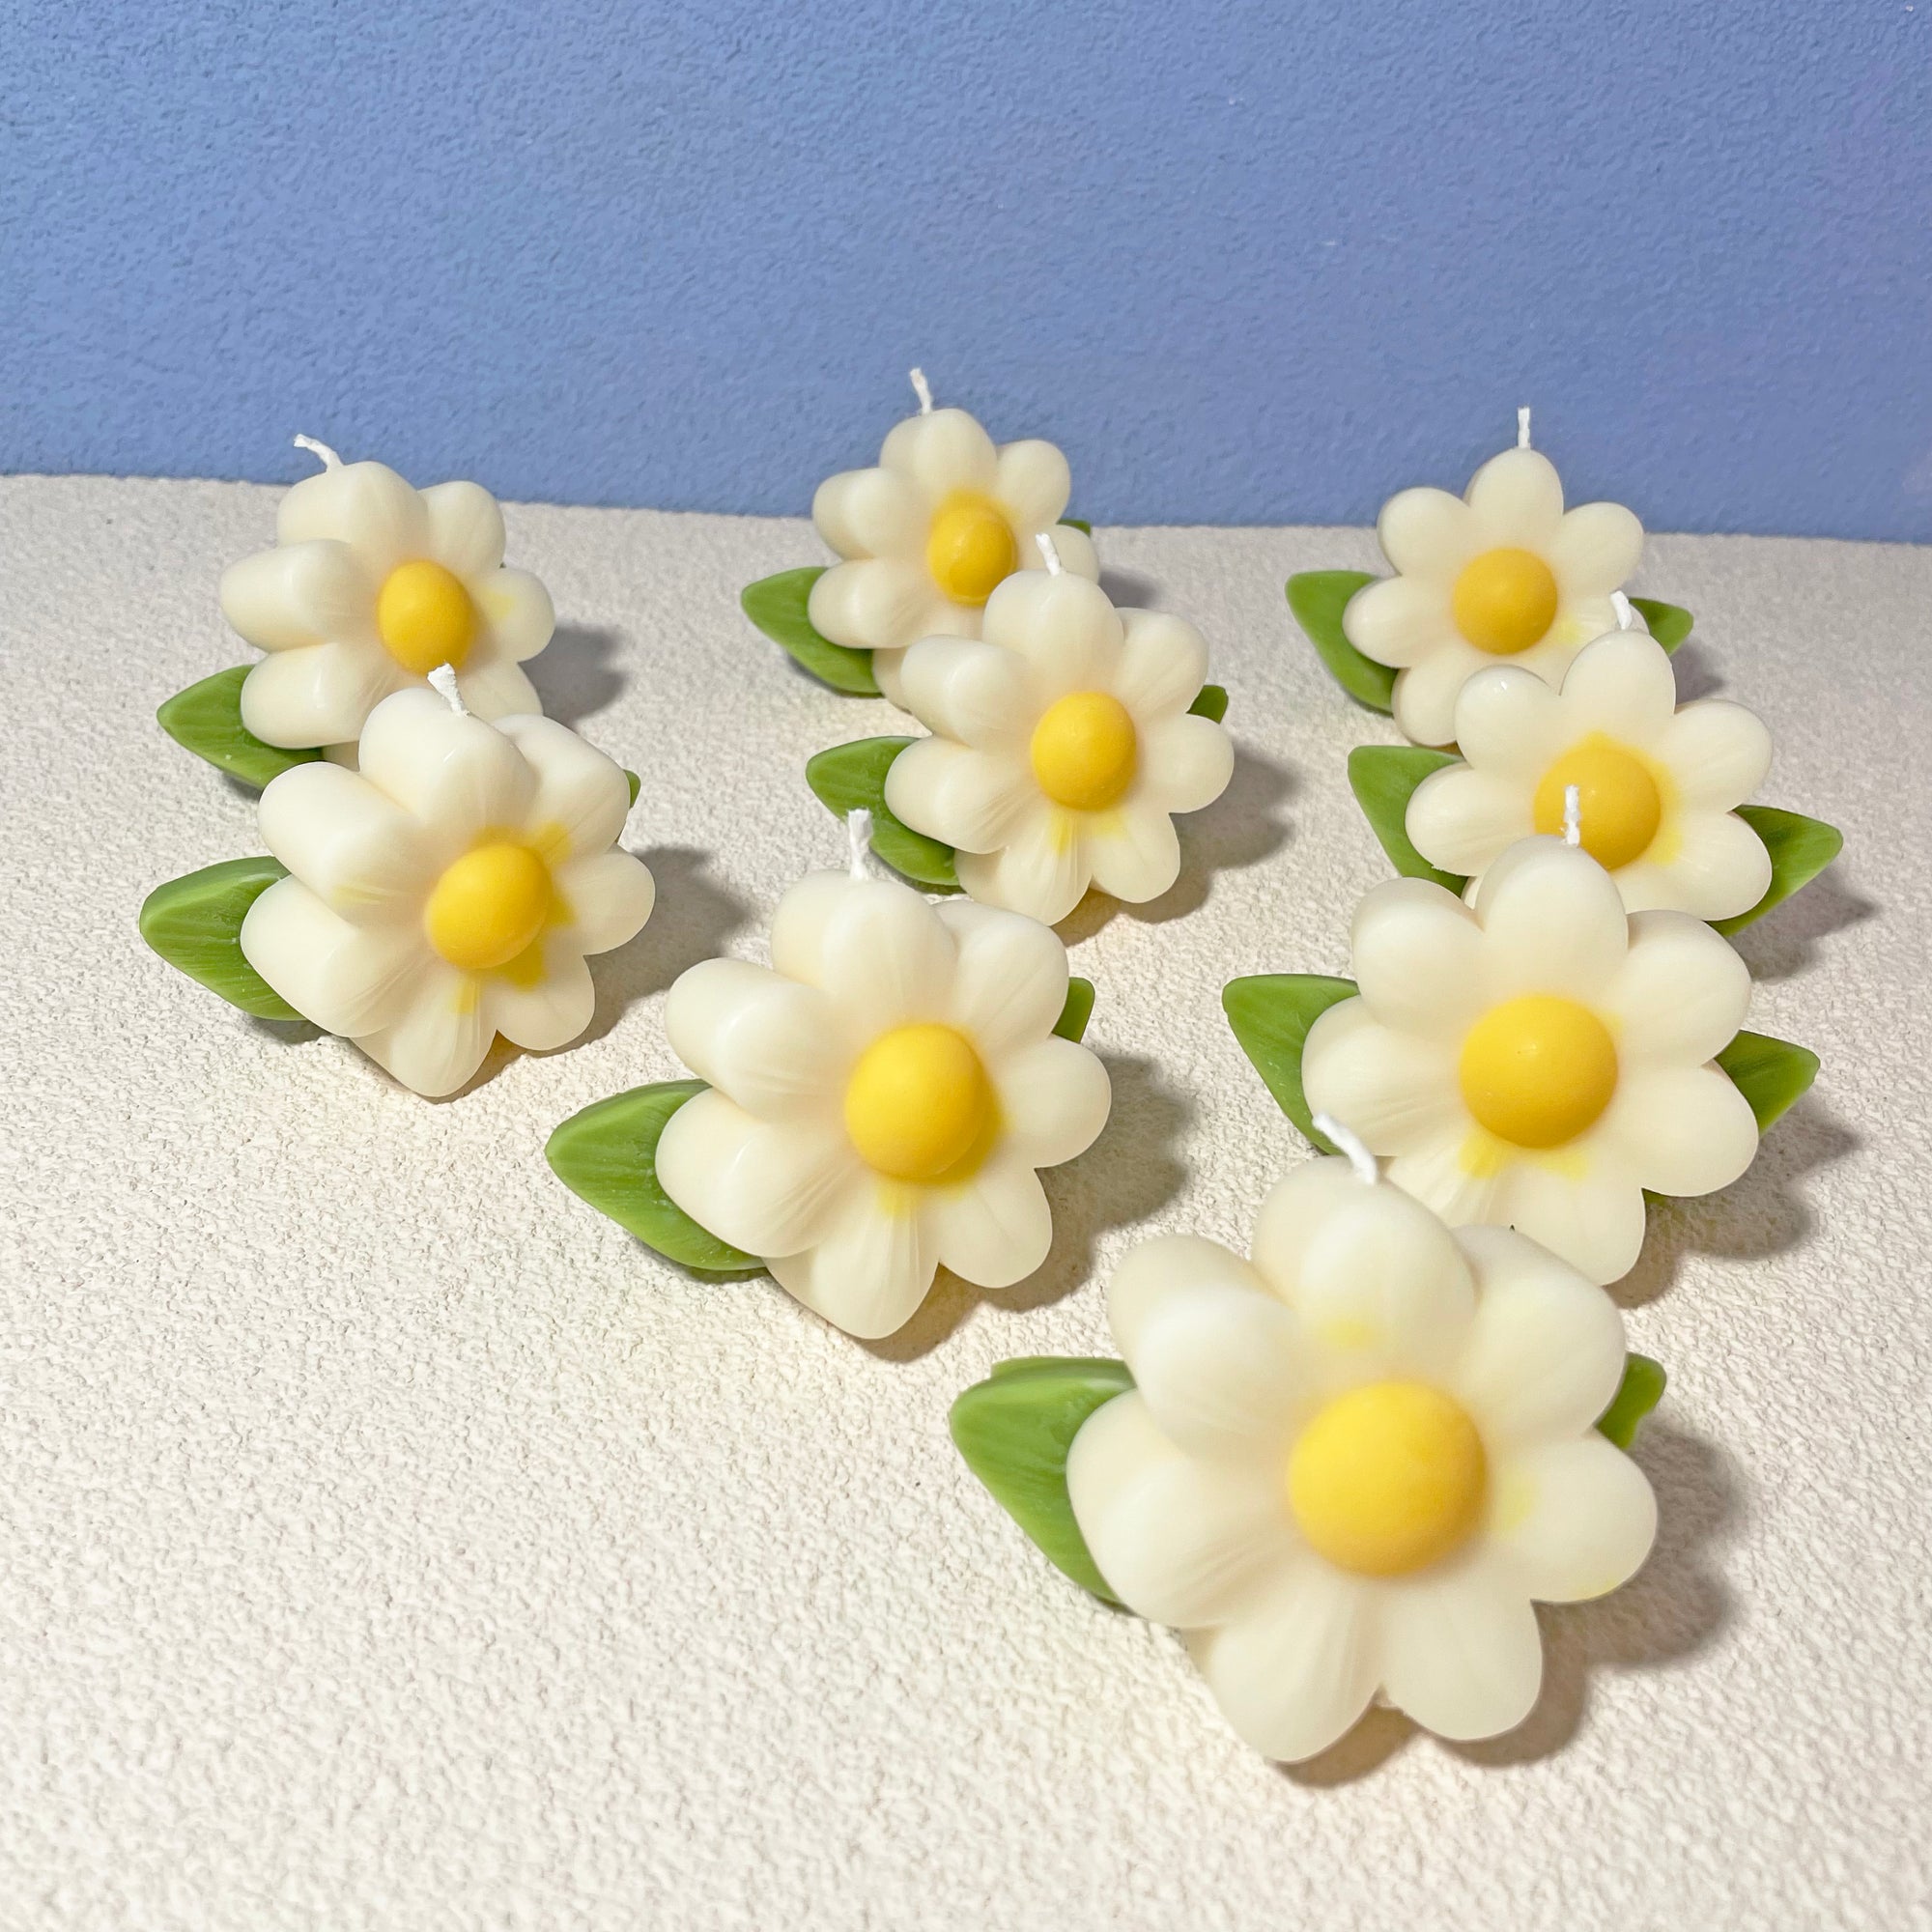 【SAMPLE SALE】Vintage Flower Shaped Soy & BeesWax Candle